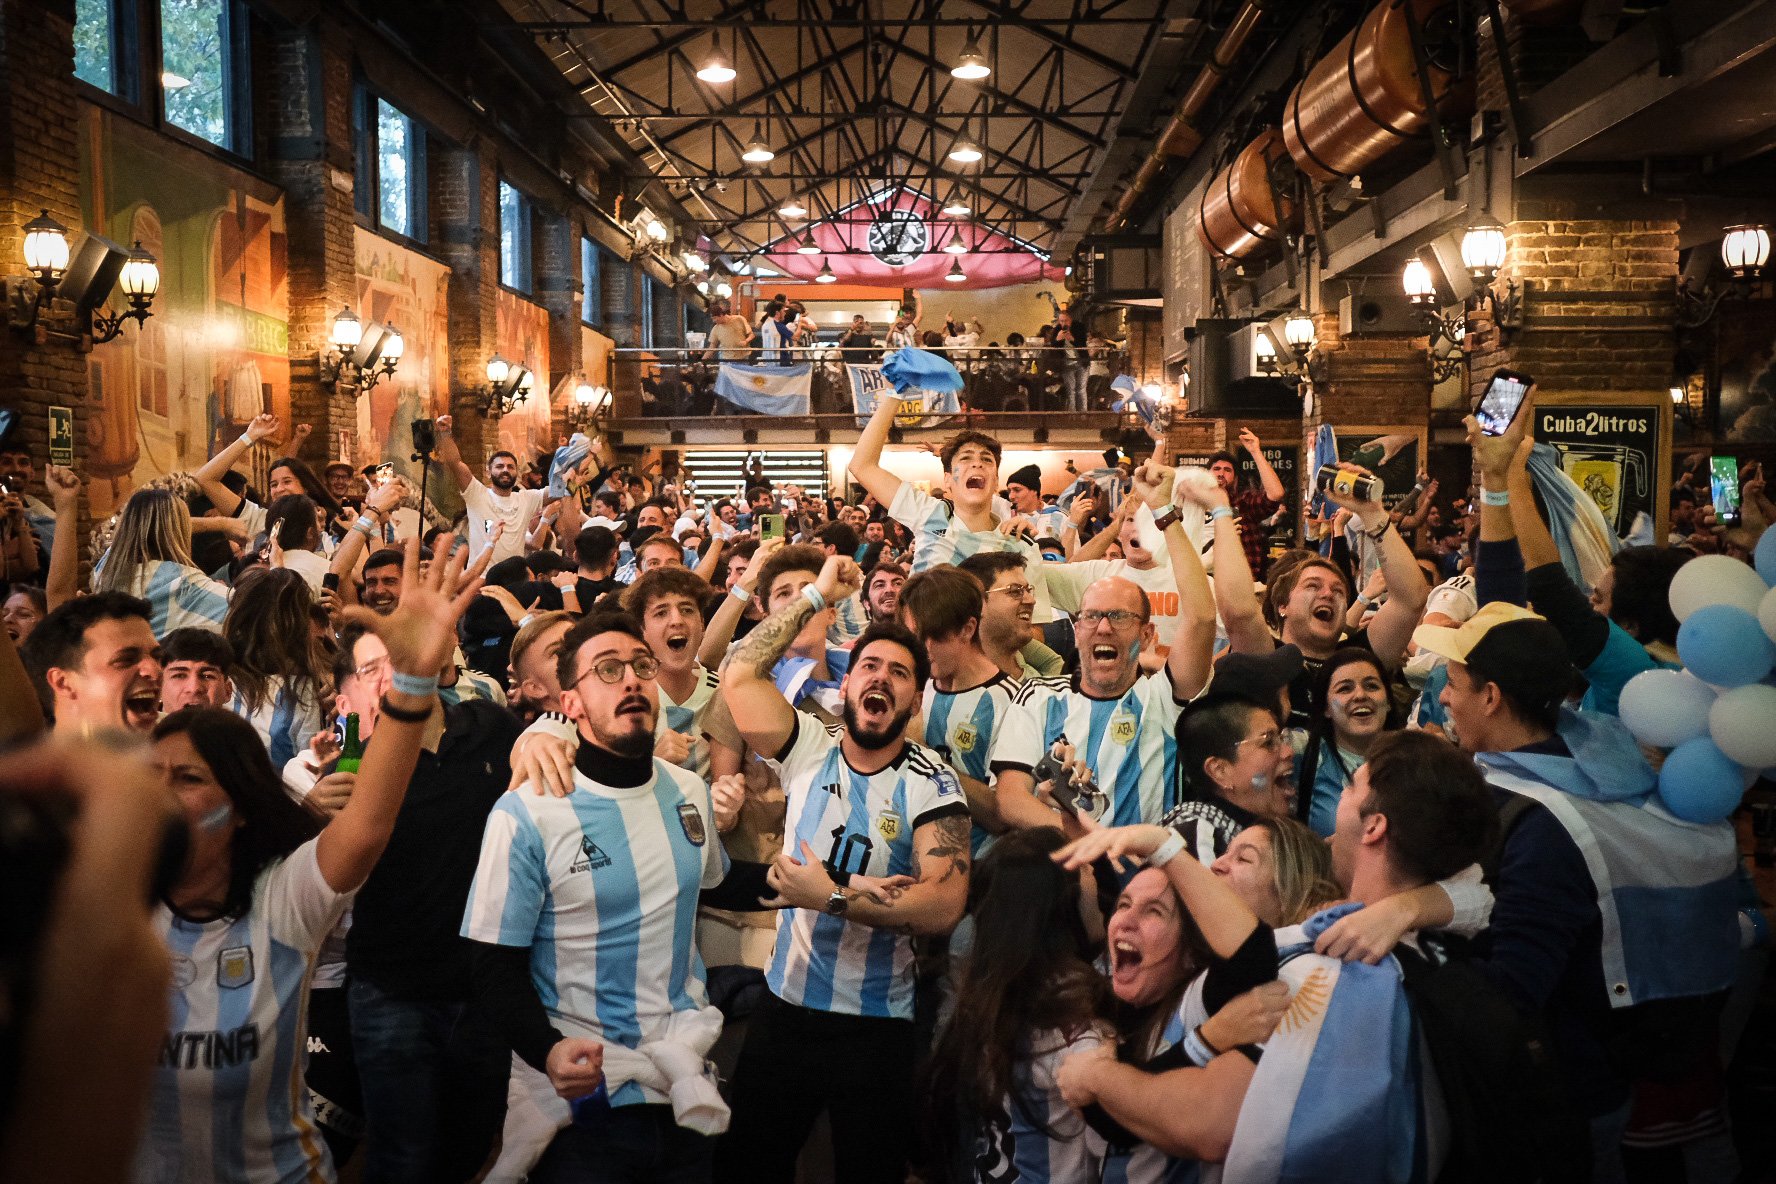 Barcelona fills with fans celebrating Argentina's triumph and Messi's glory | VIDEOS